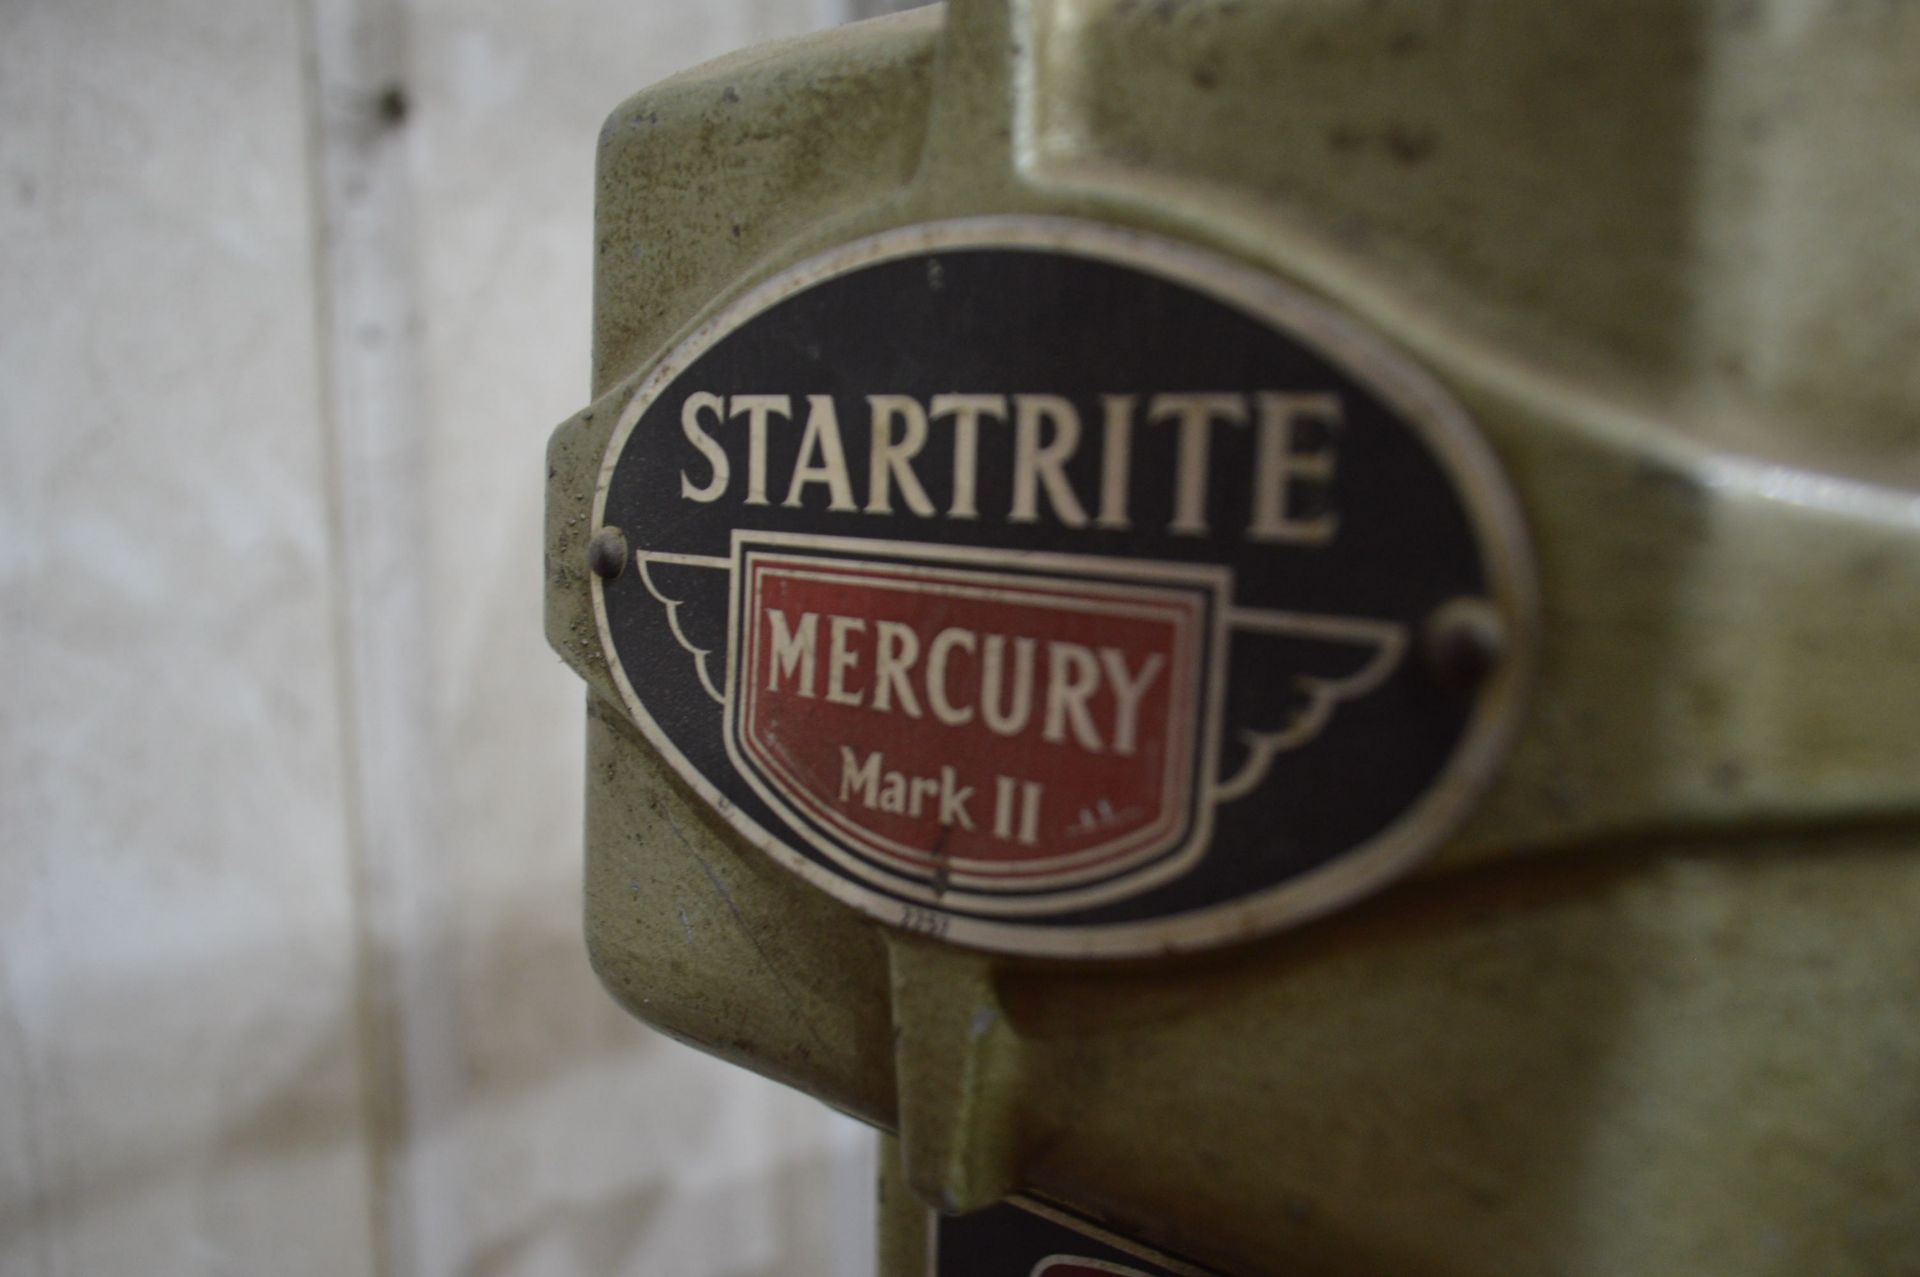 Startrite Mercury Mark II Bench Drill, 240V, with bench - Image 3 of 3